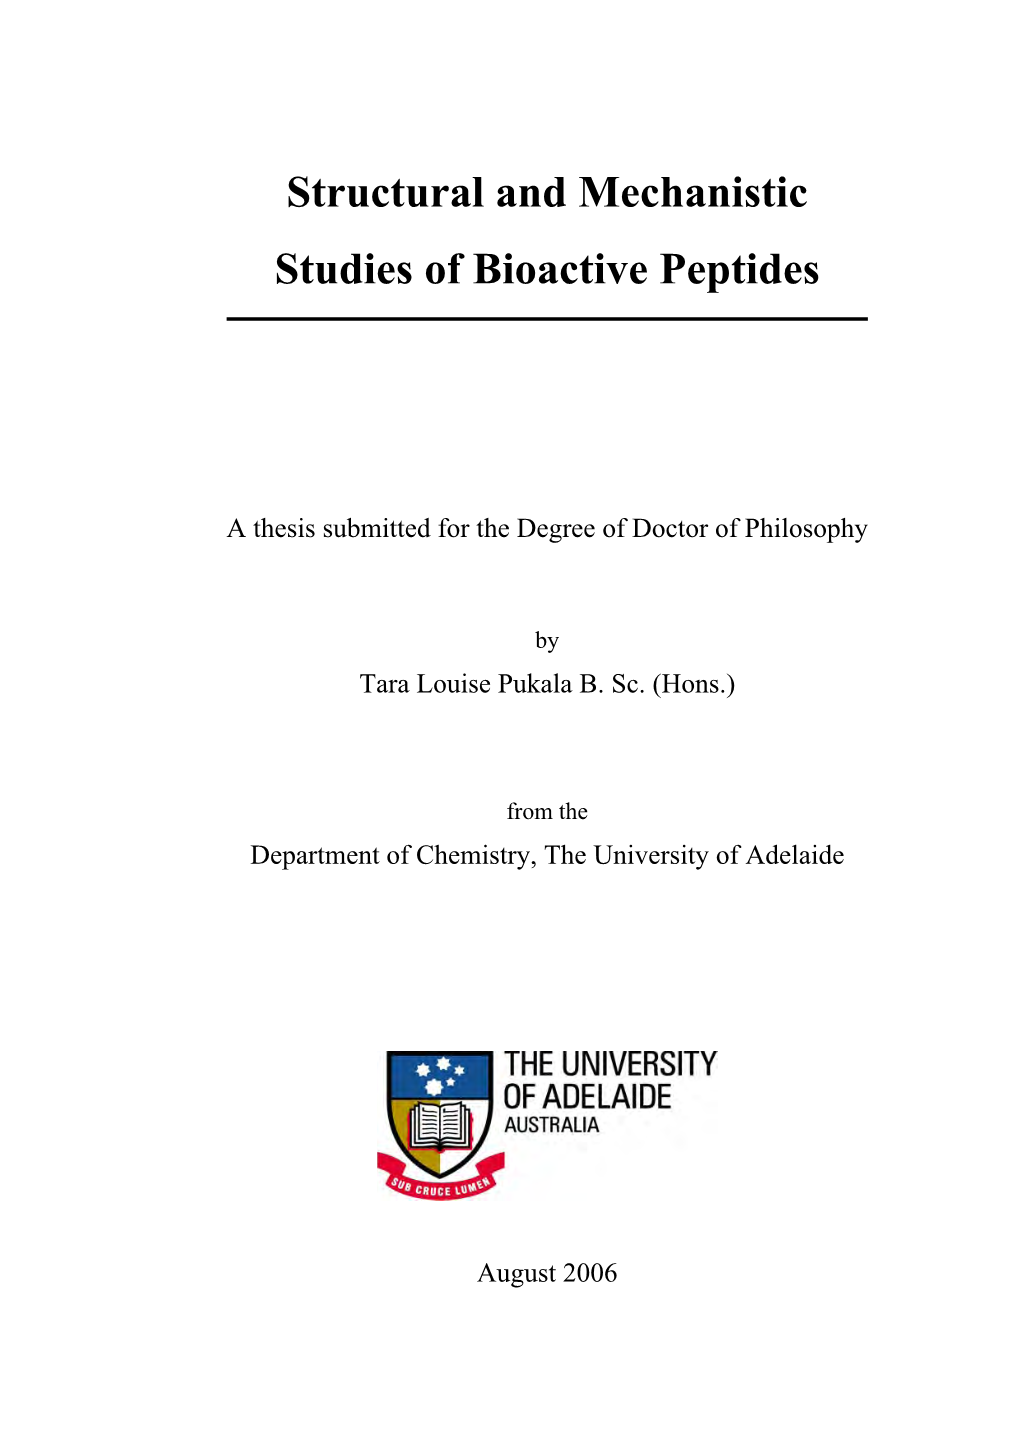 Structural and Mecanistic Studies of Bioactive Peptides